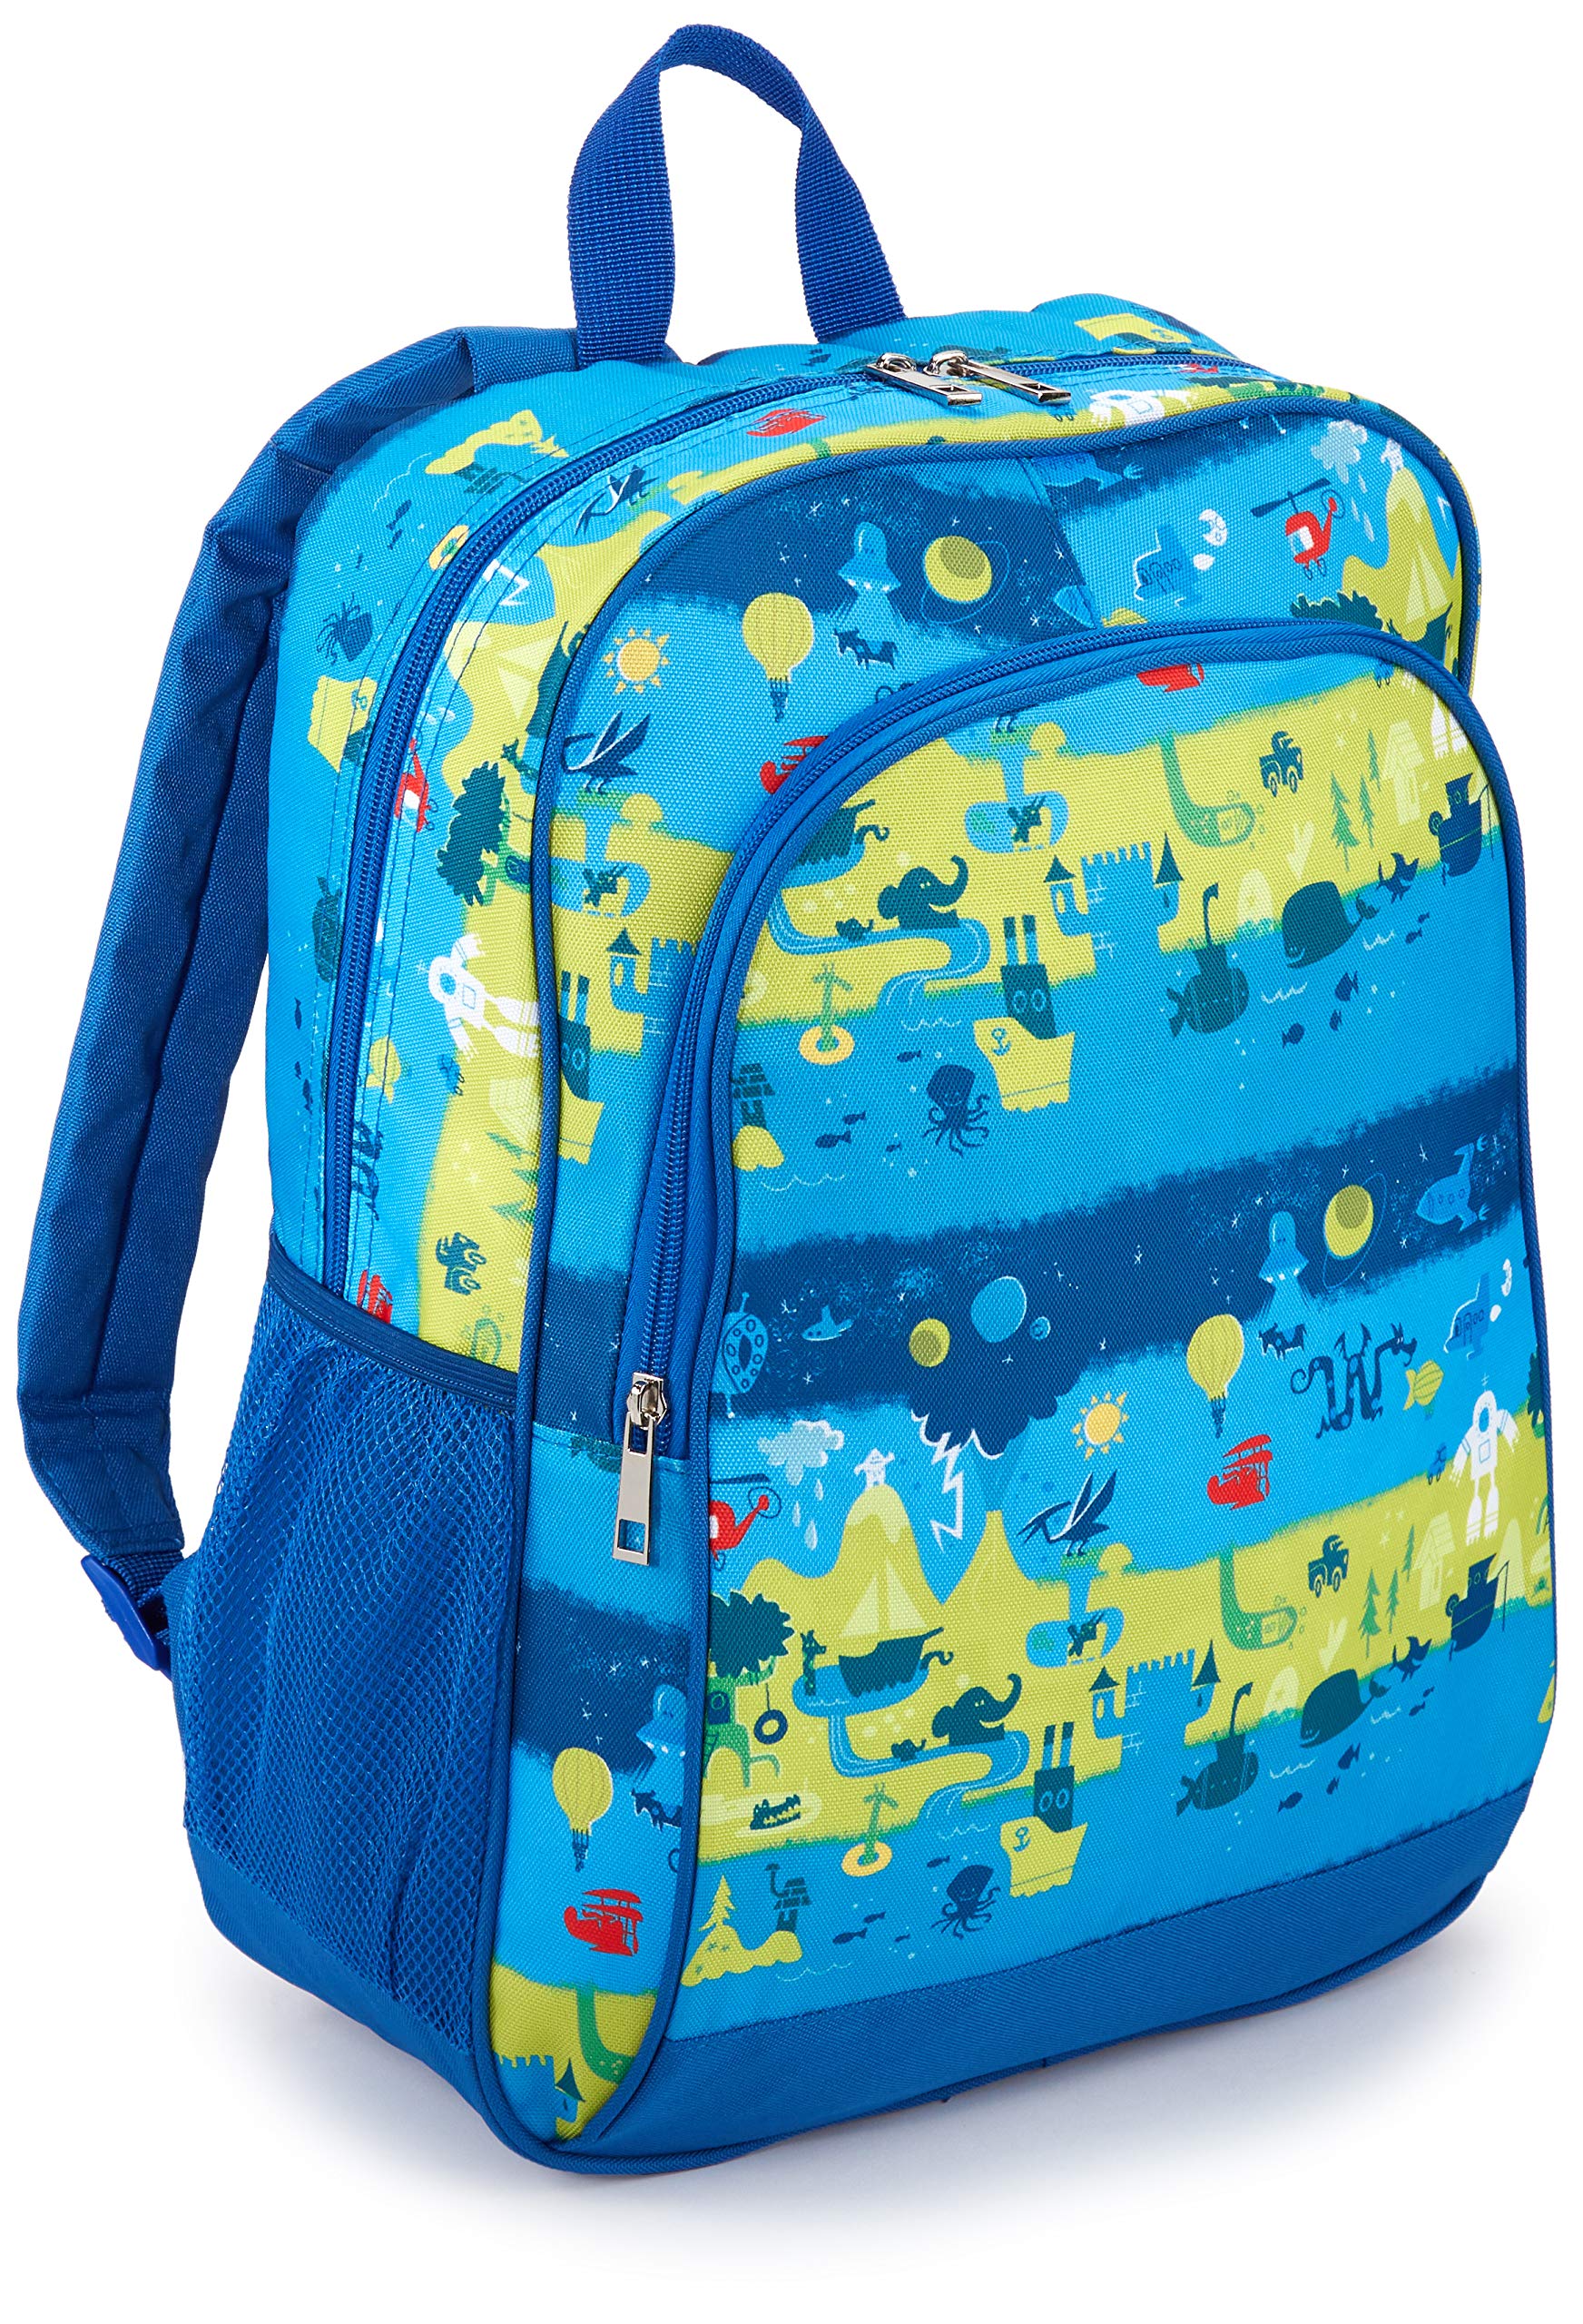 Amazon Exclusive Kids Backpack, Layers (Compatible with Kids Fire 7